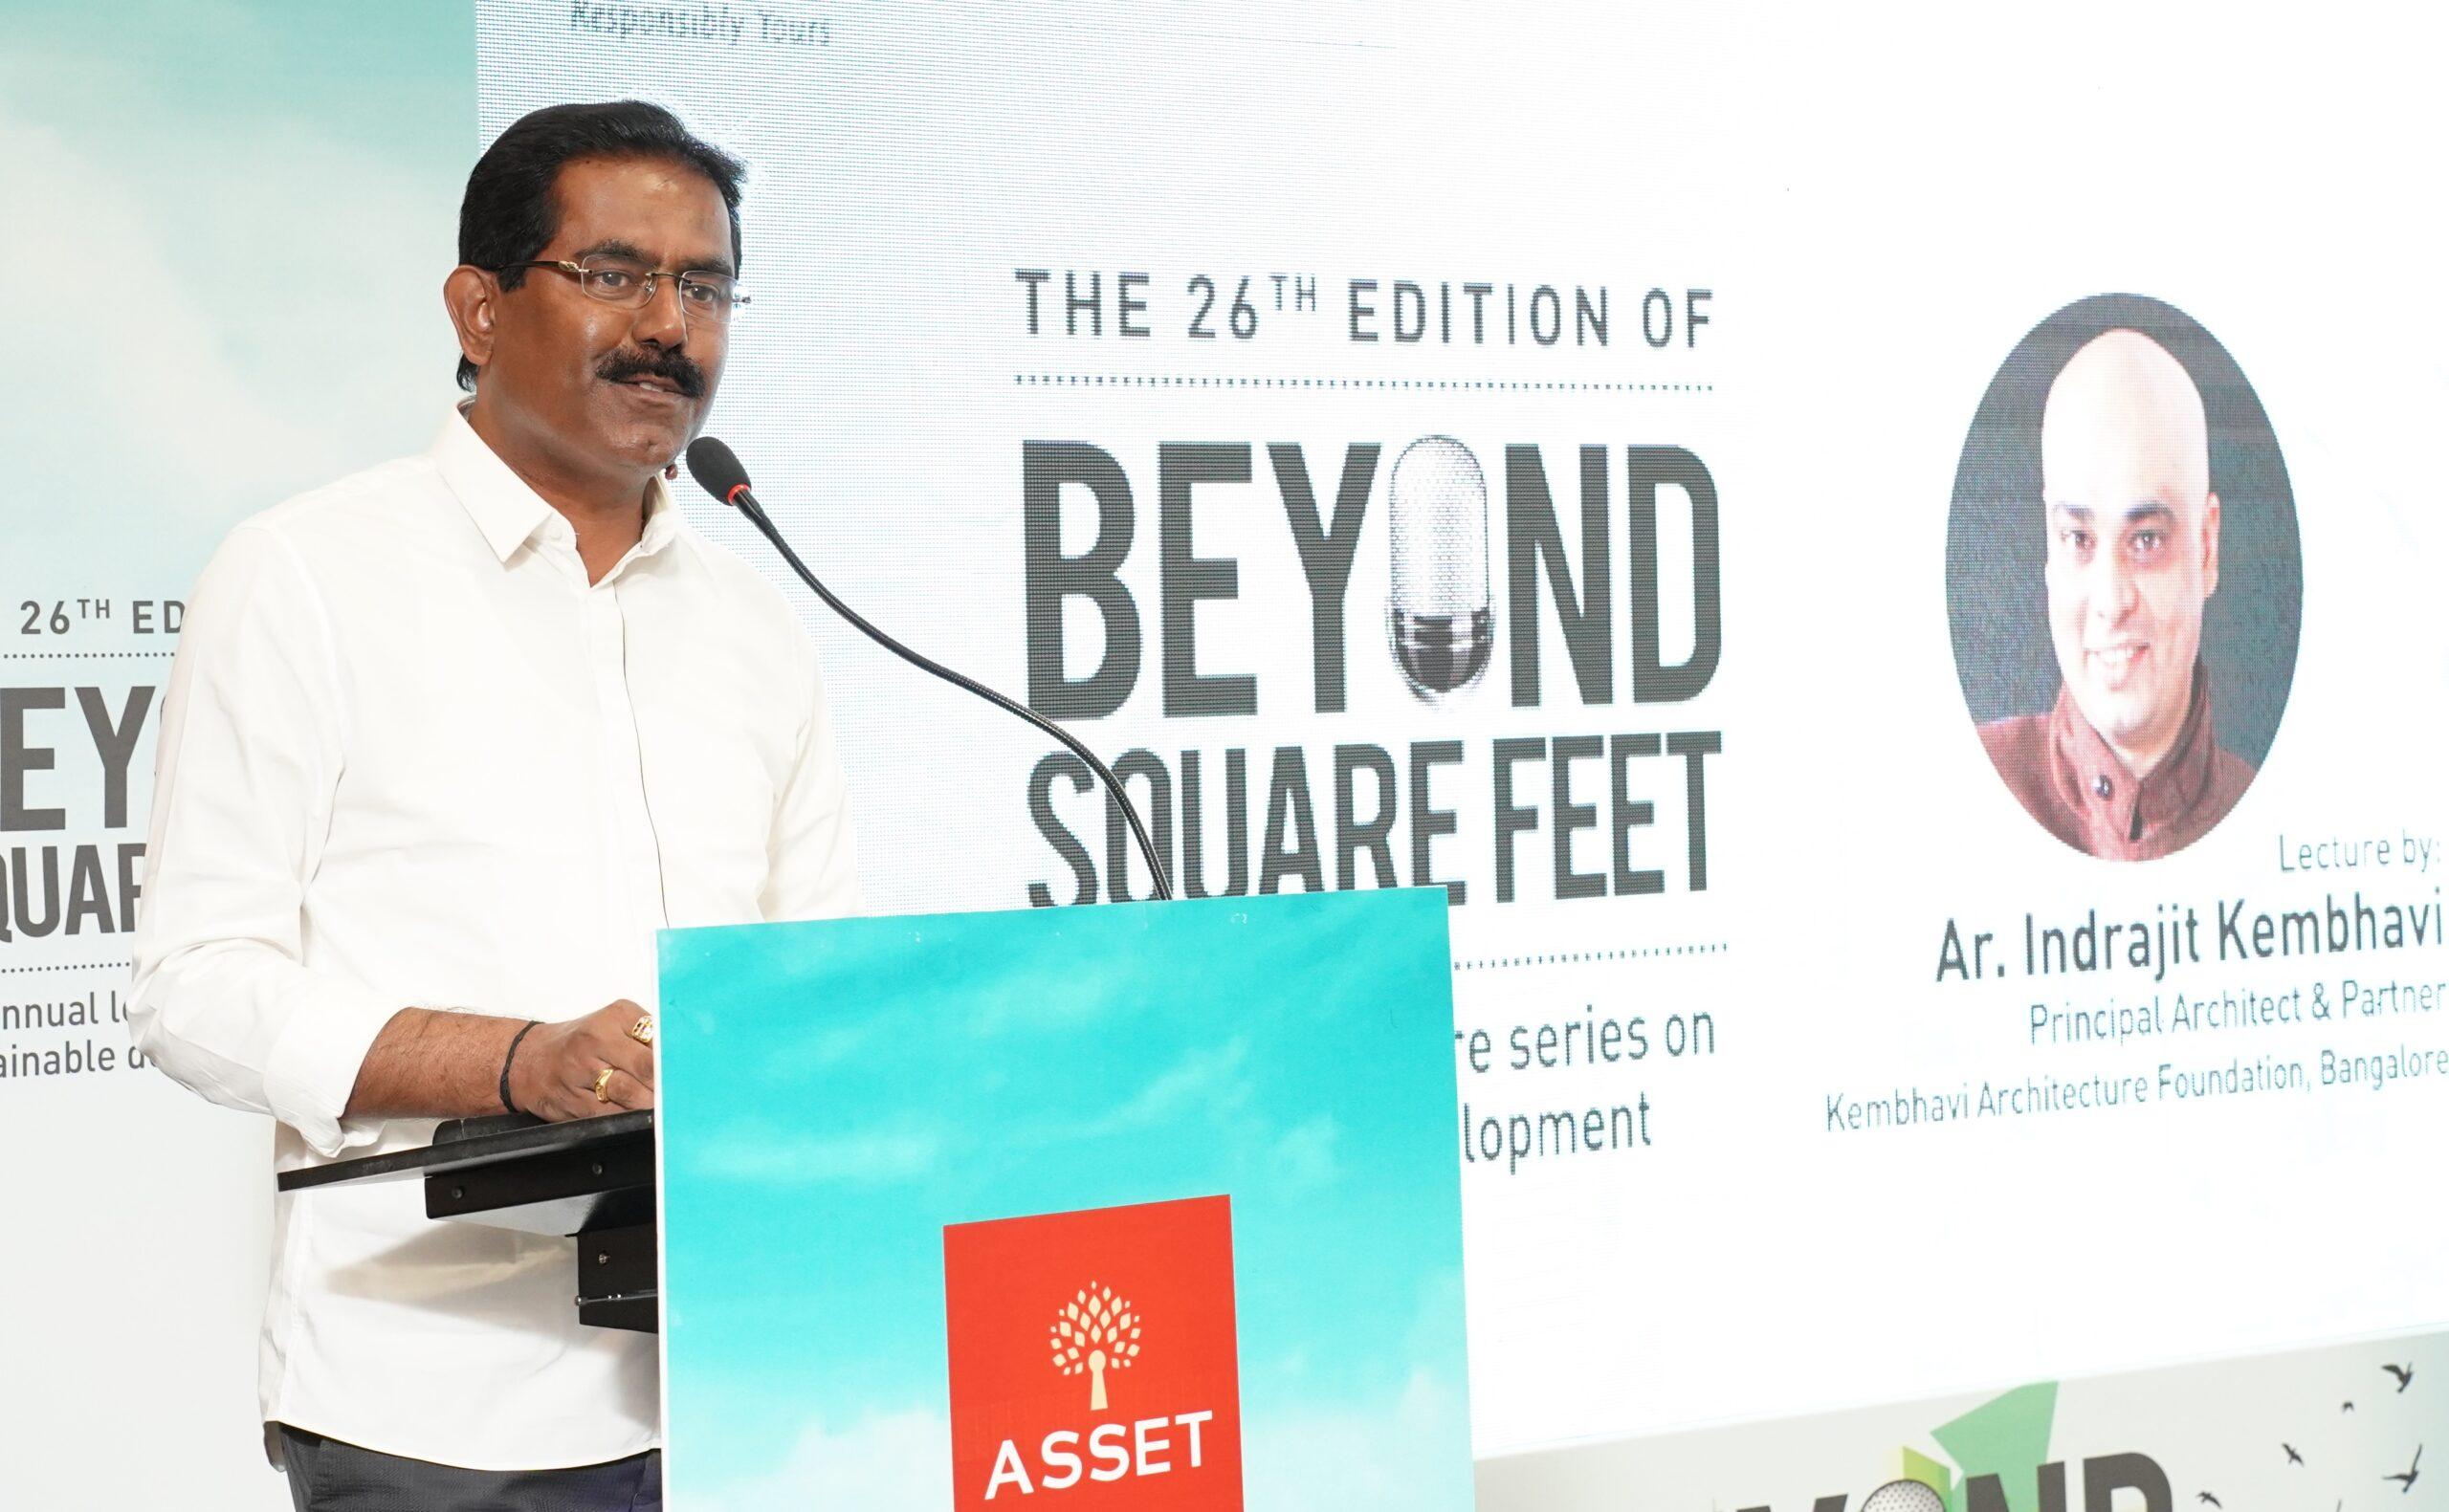 26th edition of ‘Beyond Square Feet